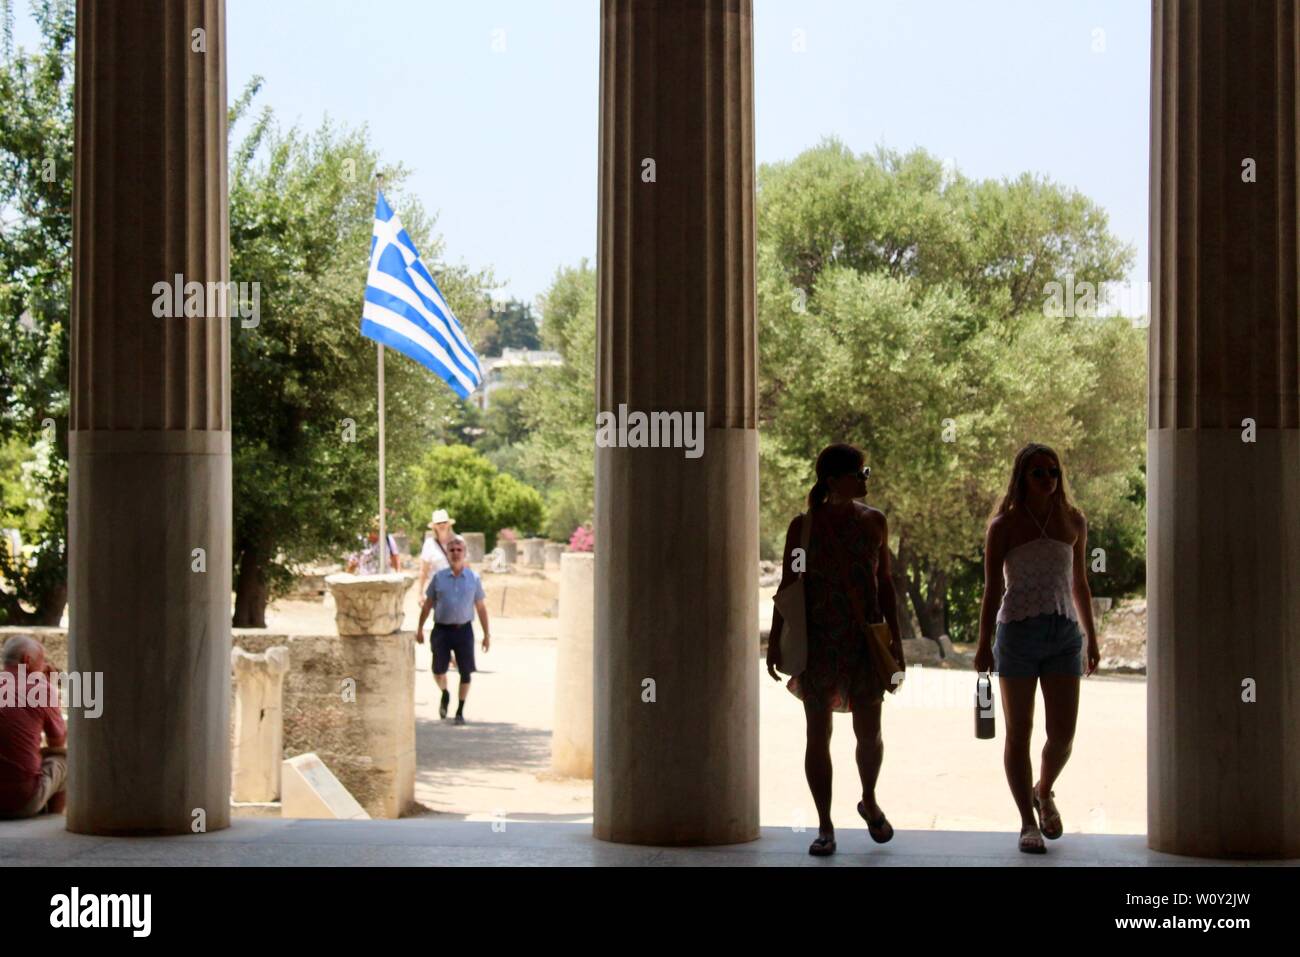 Ancient Agora of Athens two women near pillars and greek flag greece Stock Photo